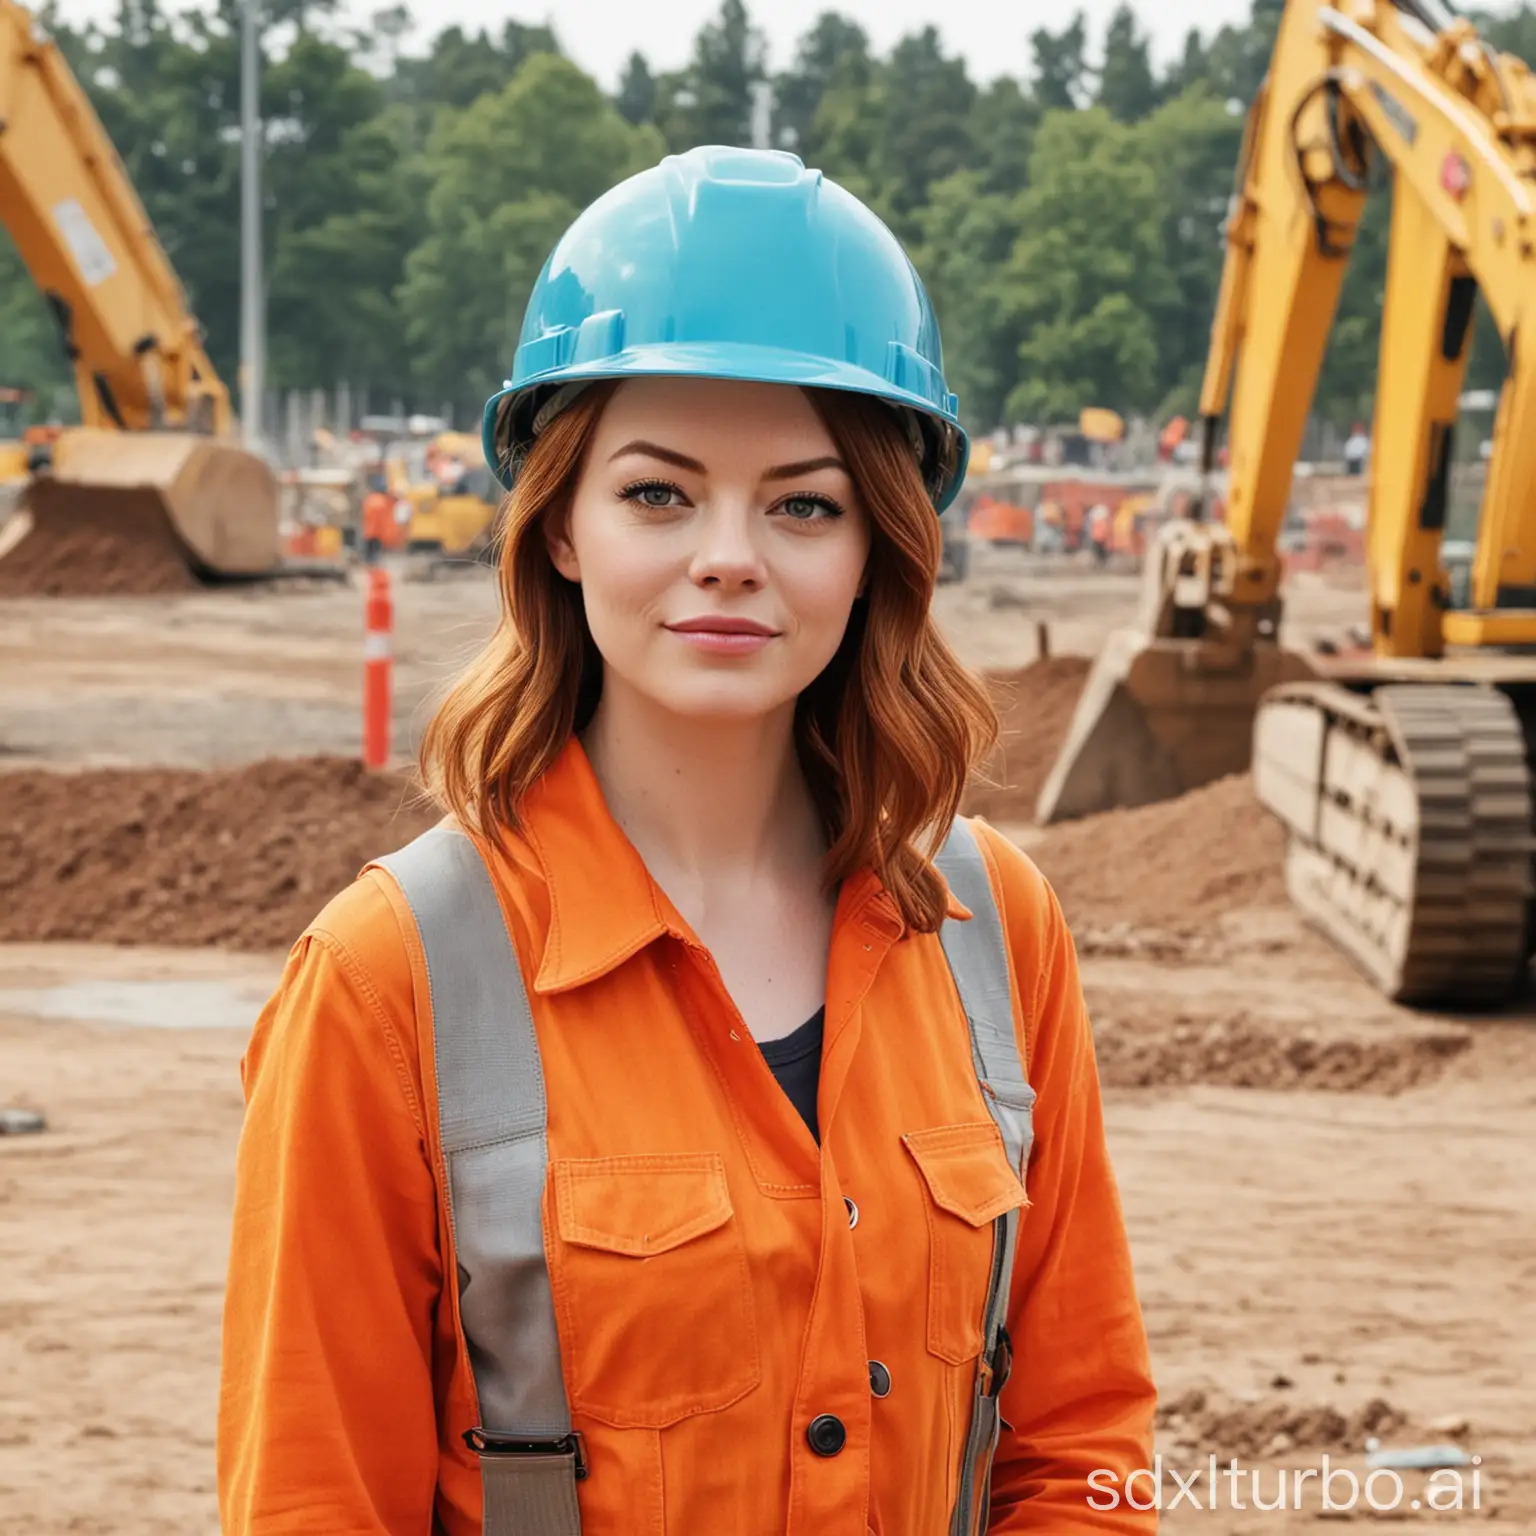 Emma-Stone-in-Construction-Worker-Attire-at-Park-Construction-Site